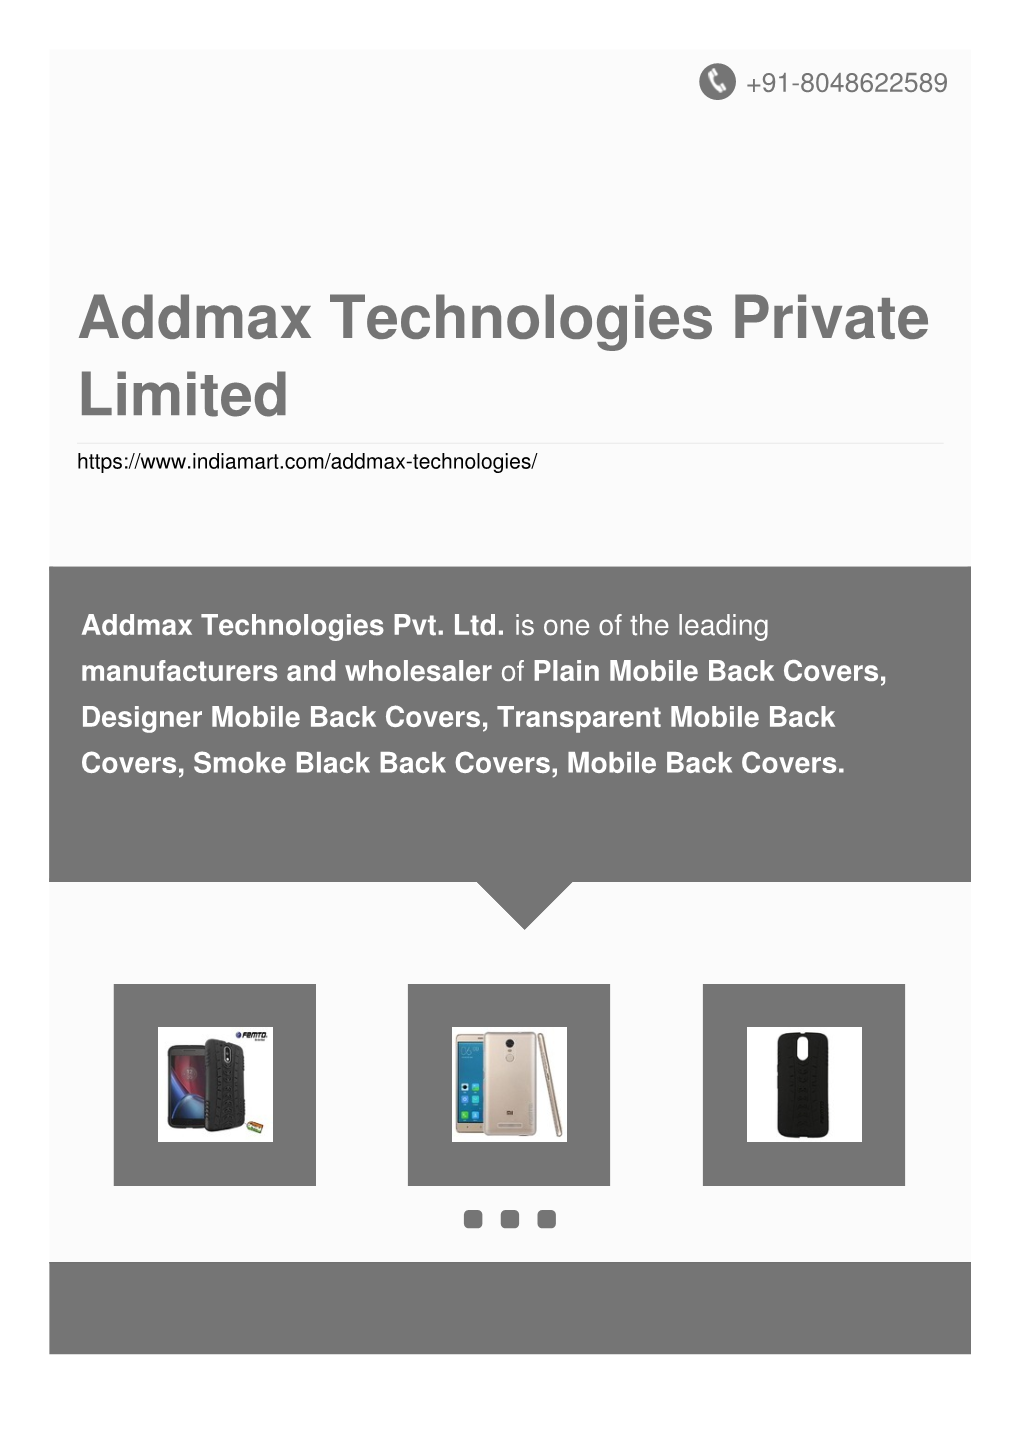 Addmax Technologies Private Limited